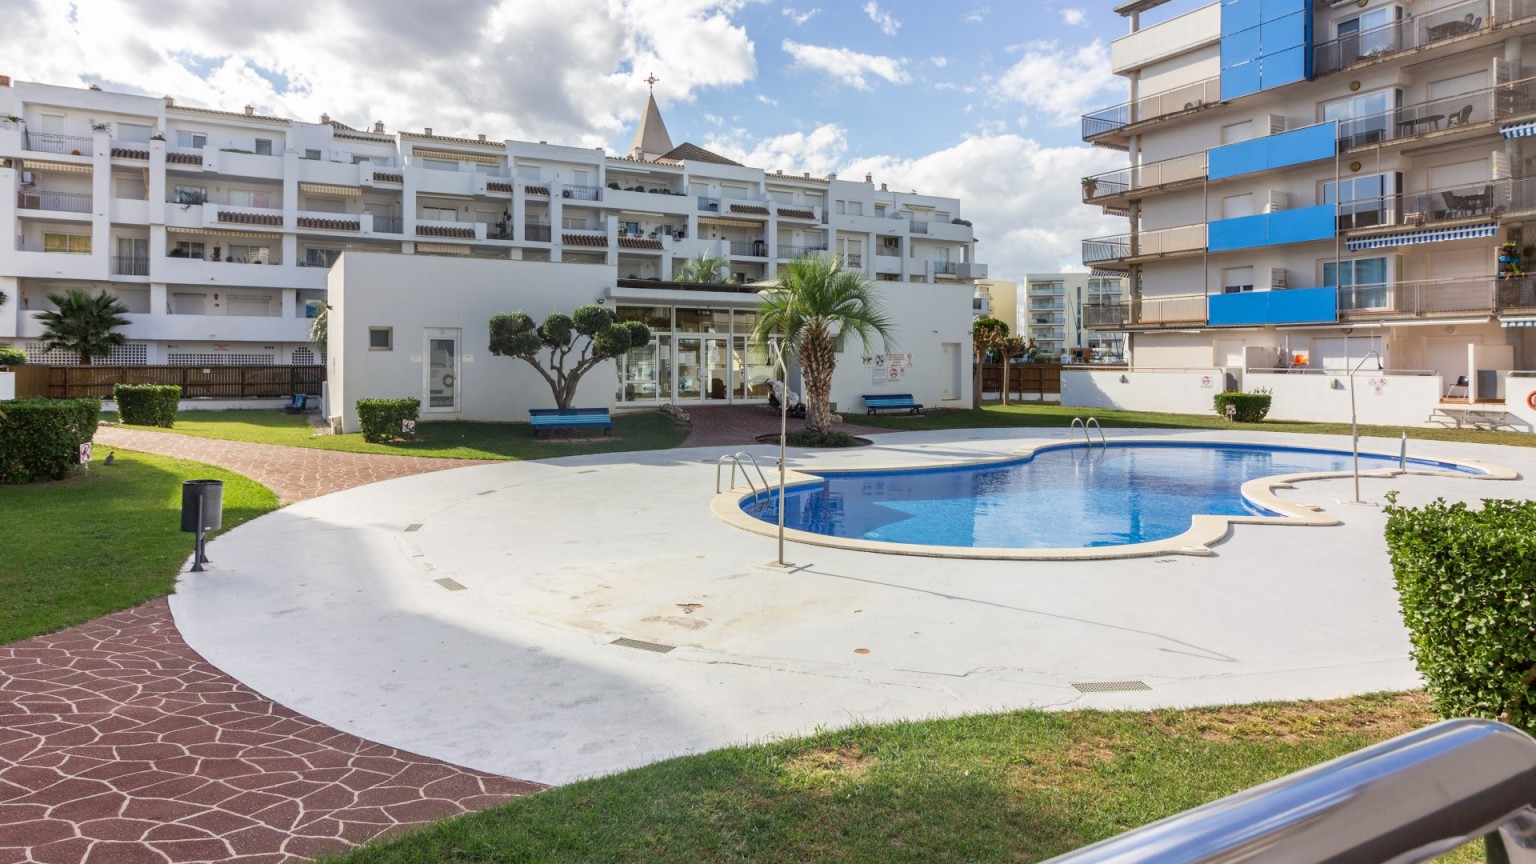 Apartment with two bedrooms, community pool in Sta. Margarita.